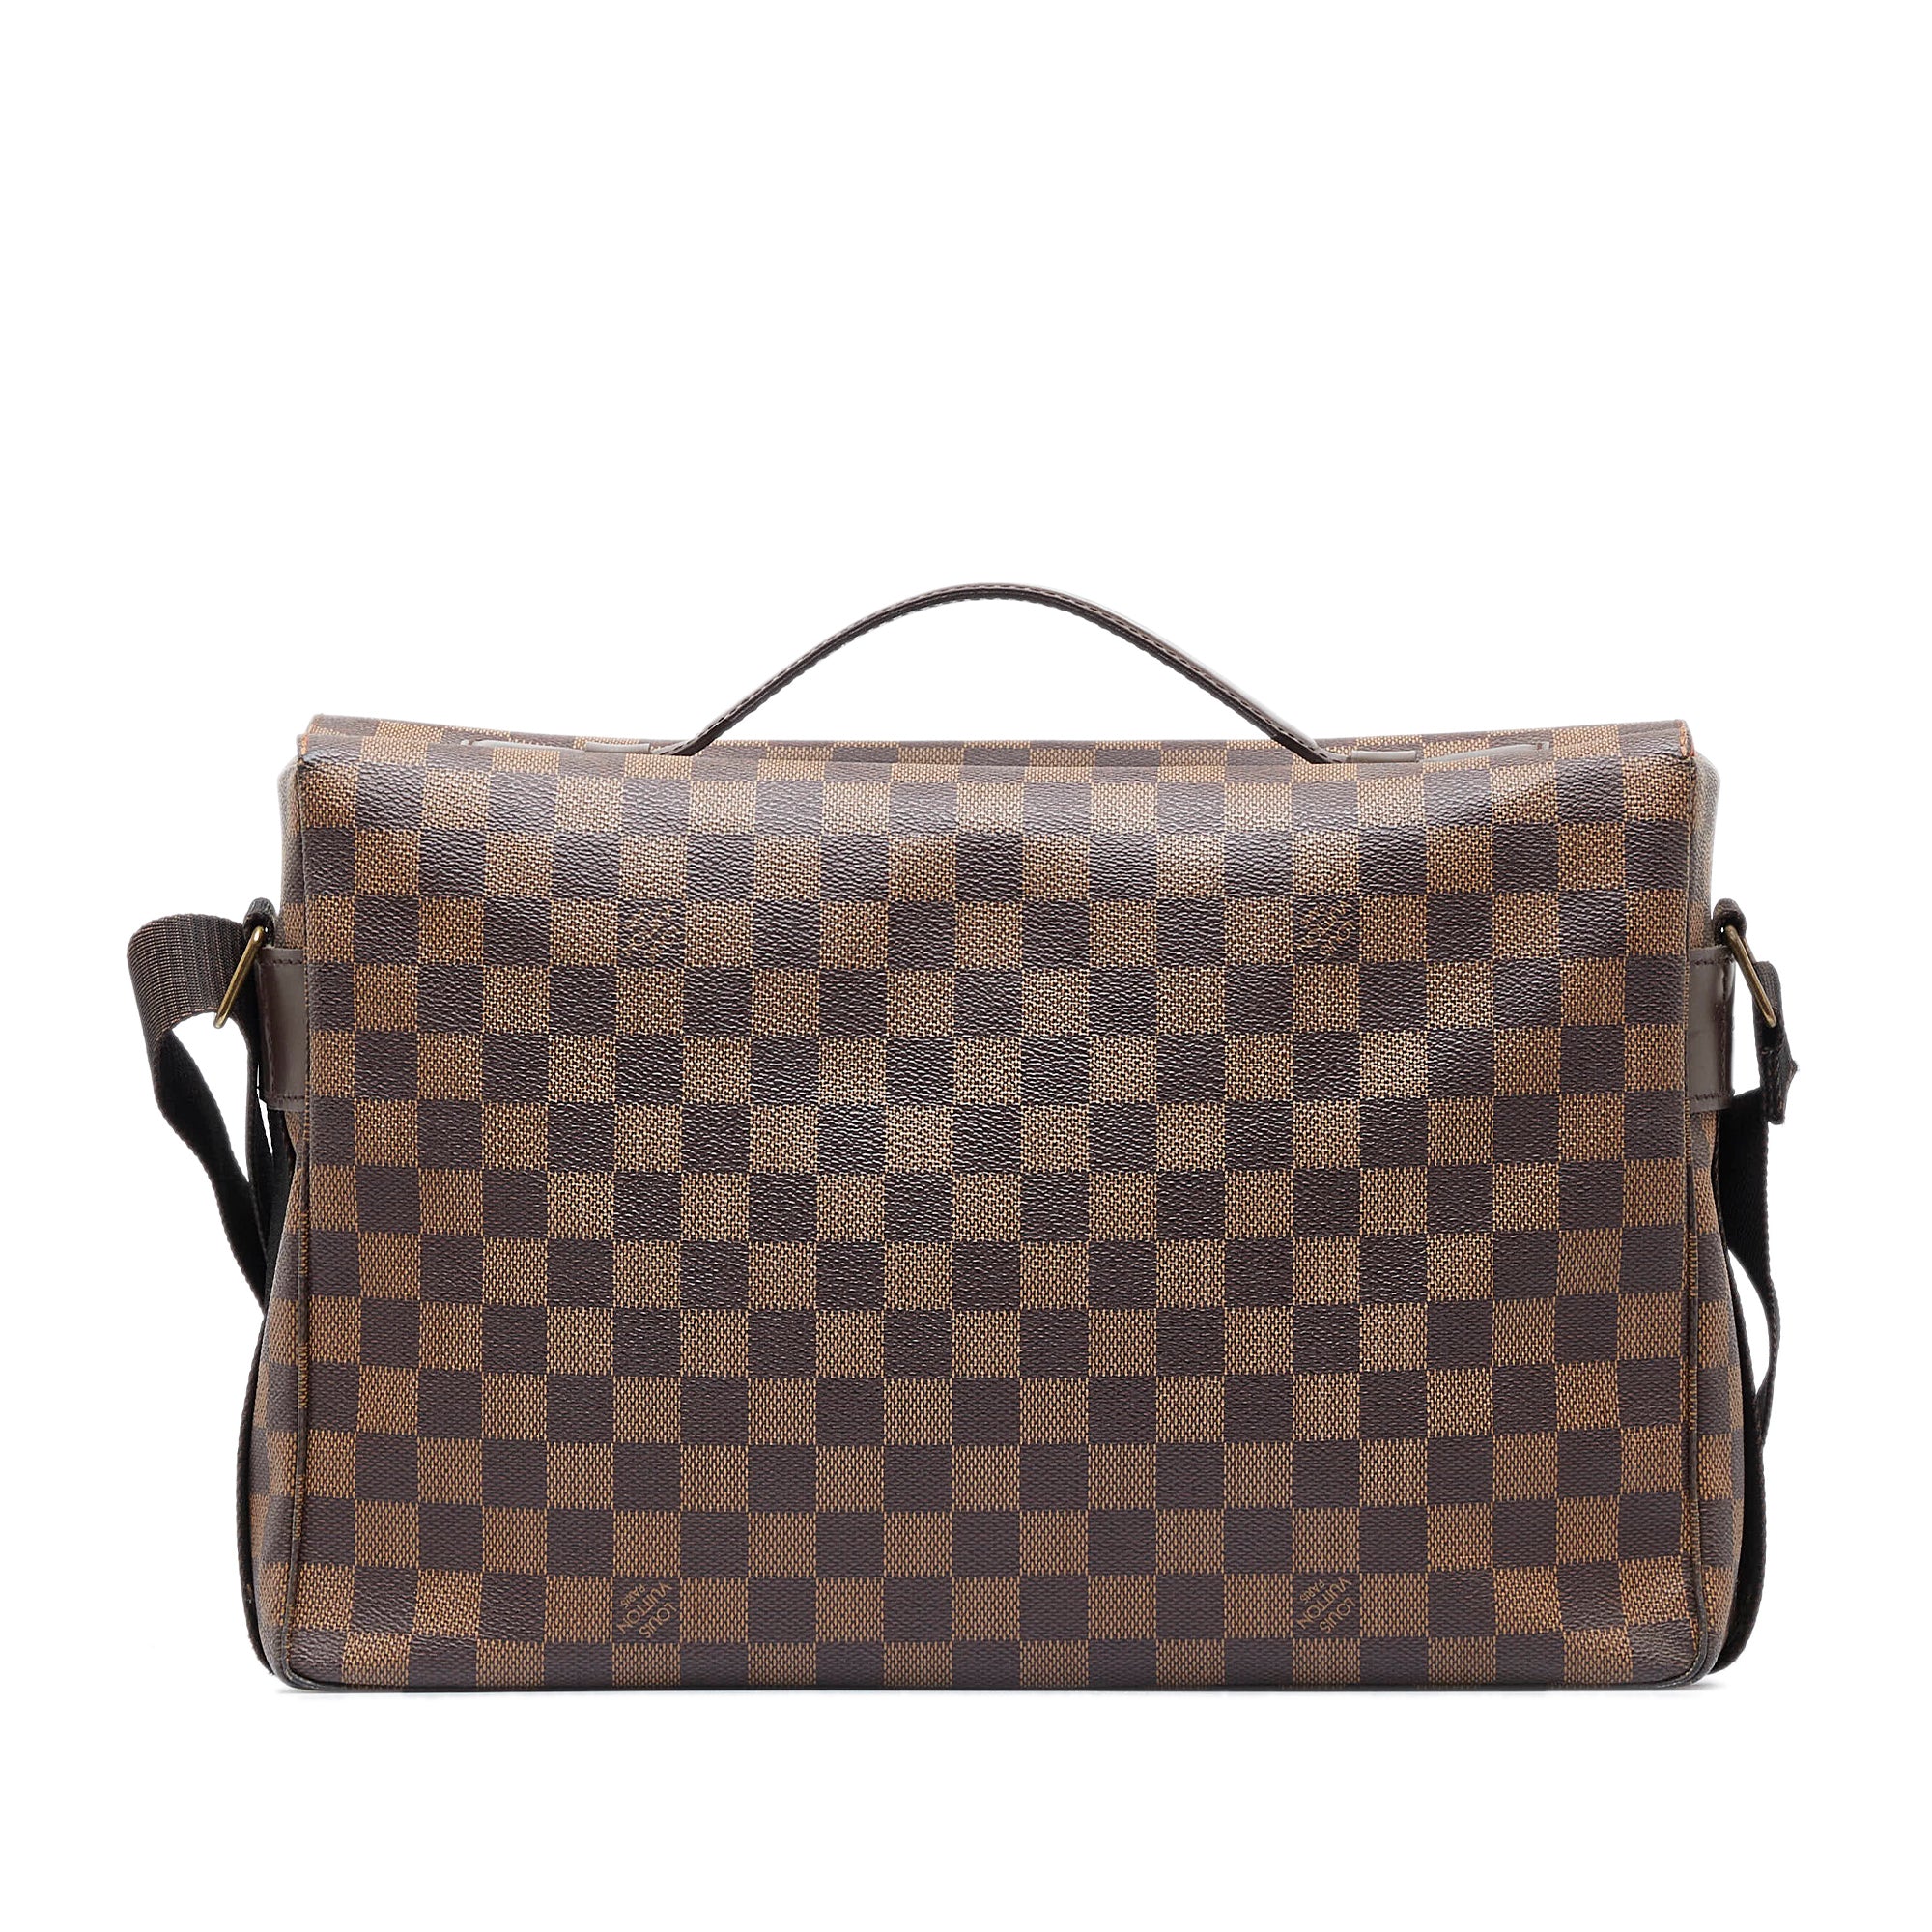 Damier Ebene Leather Broadway Messenger Bag (Authentic Pre-owned)